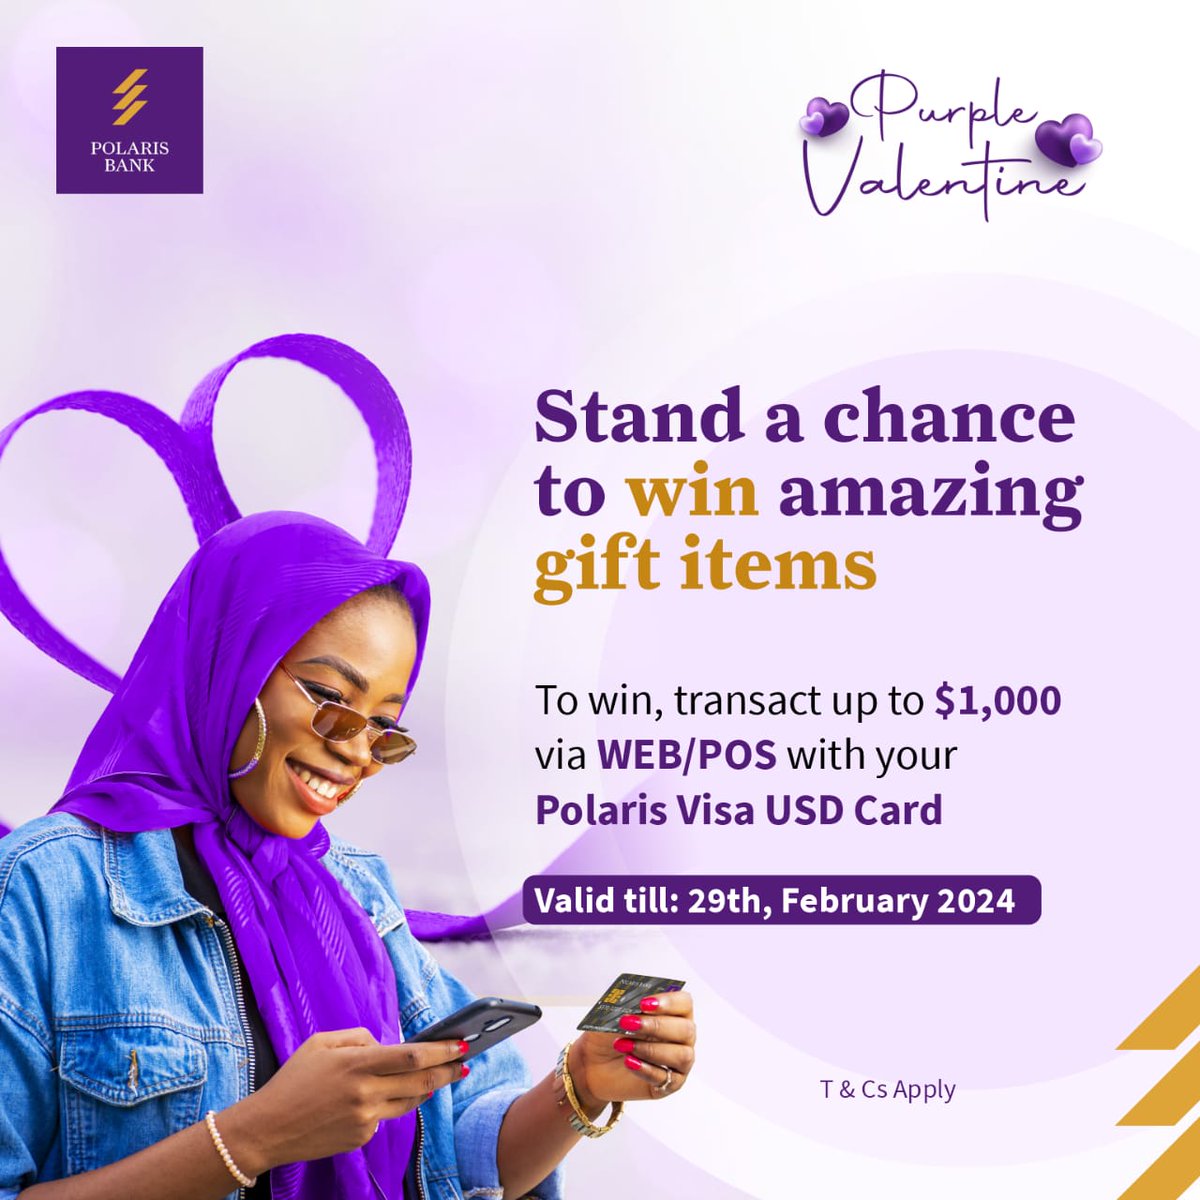 Turn your transactions into wins 

Stand a chance to win amazing prizes when you transact up to $1000 via WEB/POS with your Polaris Visa USD Card! 

Start transacting, start winning!

#WinWithPolaris 
#ShoppingRewards 
#VisaMagic
#PurpleValentine
#VULTe
#VULTeIT
#VULTeForBusiness…